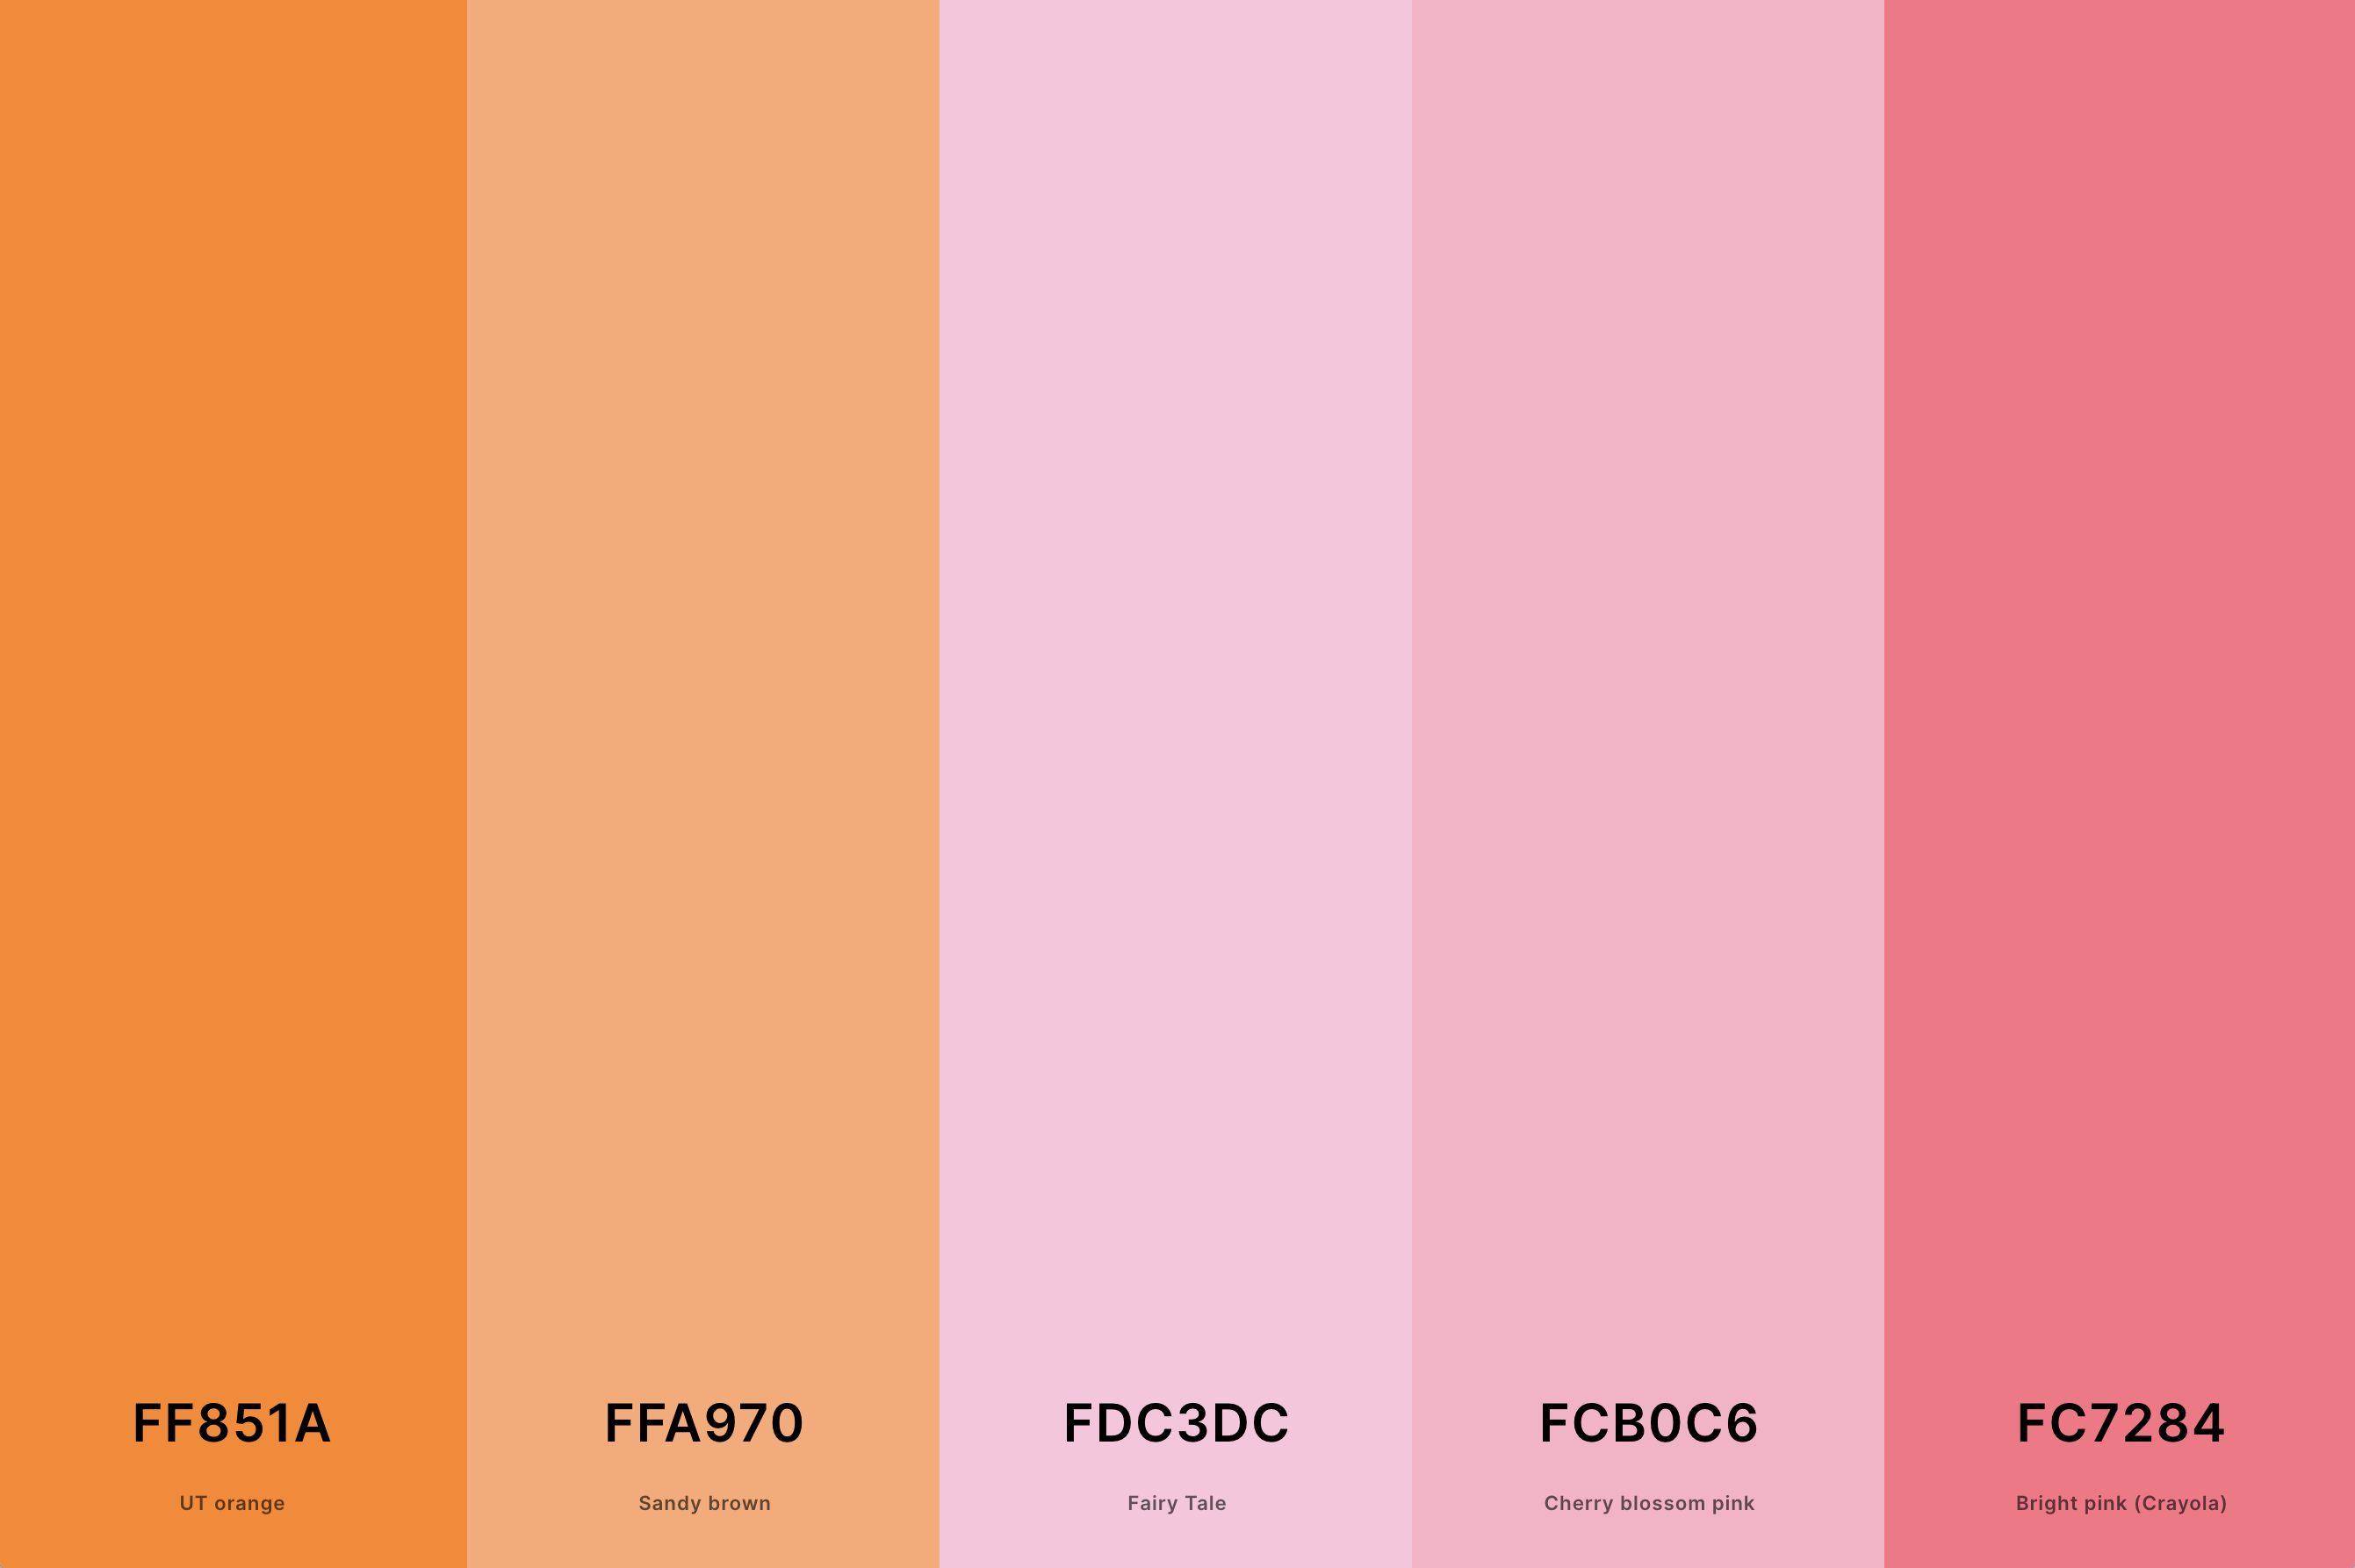 6. Orange And Pink Color Palette Color Palette with Ut Orange (Hex #FF851A) + Sandy Brown (Hex #FFA970) + Fairy Tale (Hex #FDC3DC) + Cherry Blossom Pink (Hex #FCB0C6) + Bright Pink (Crayola) (Hex #FC7284) Color Palette with Hex Codes